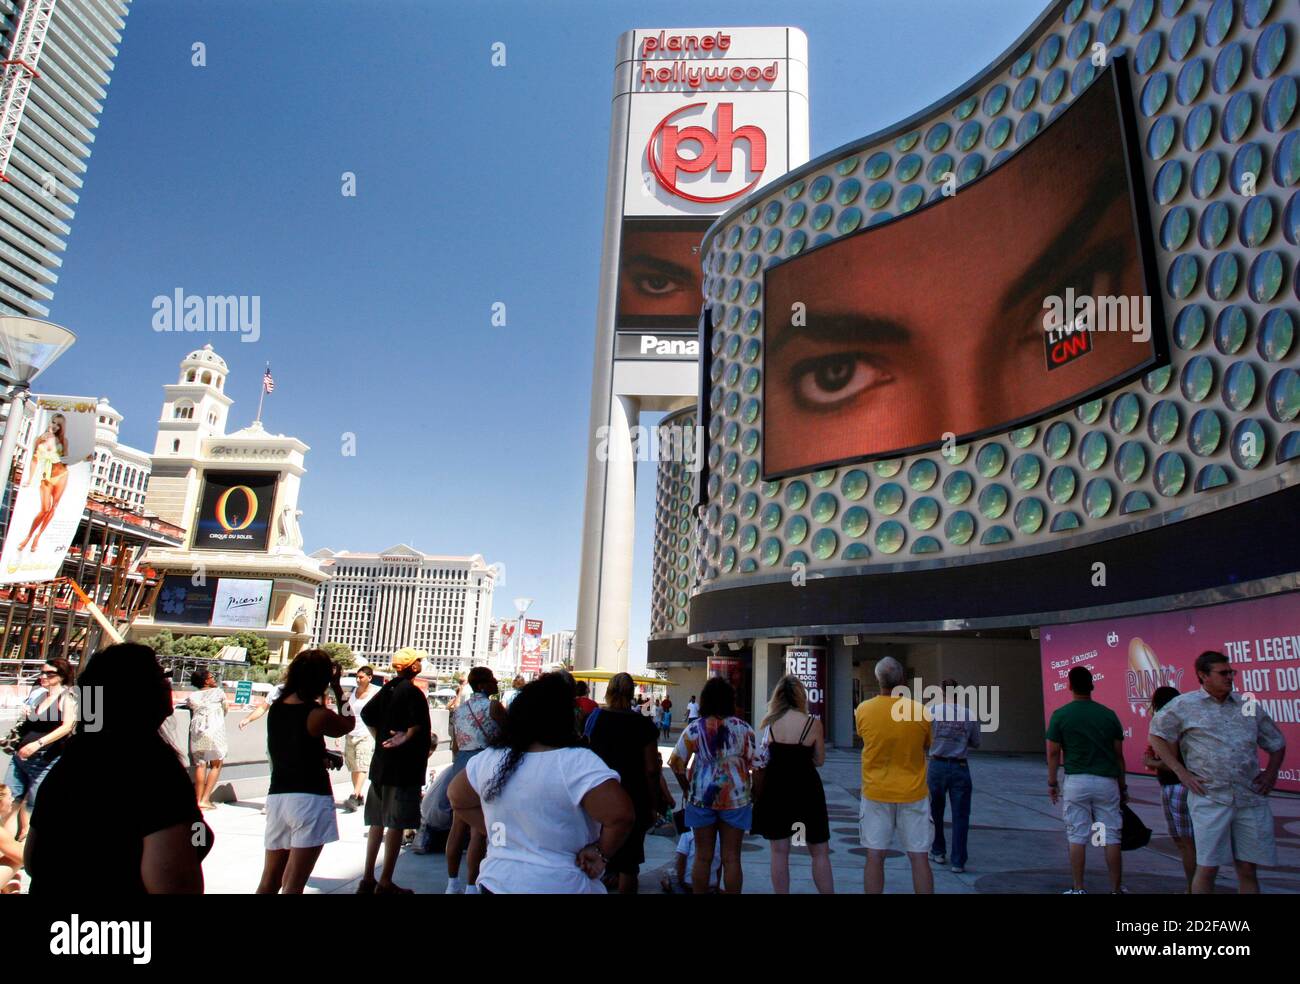 People watch live television news coverage of the Michael Jackson memorial outside the Planet Hollywood hotel-casino in Las Vegas, Nevada July 7, 2009. REUTERS/Las Vegas Sun/Steve Marcus (UNITED STATES ENTERTAINMENT) Stock Photo